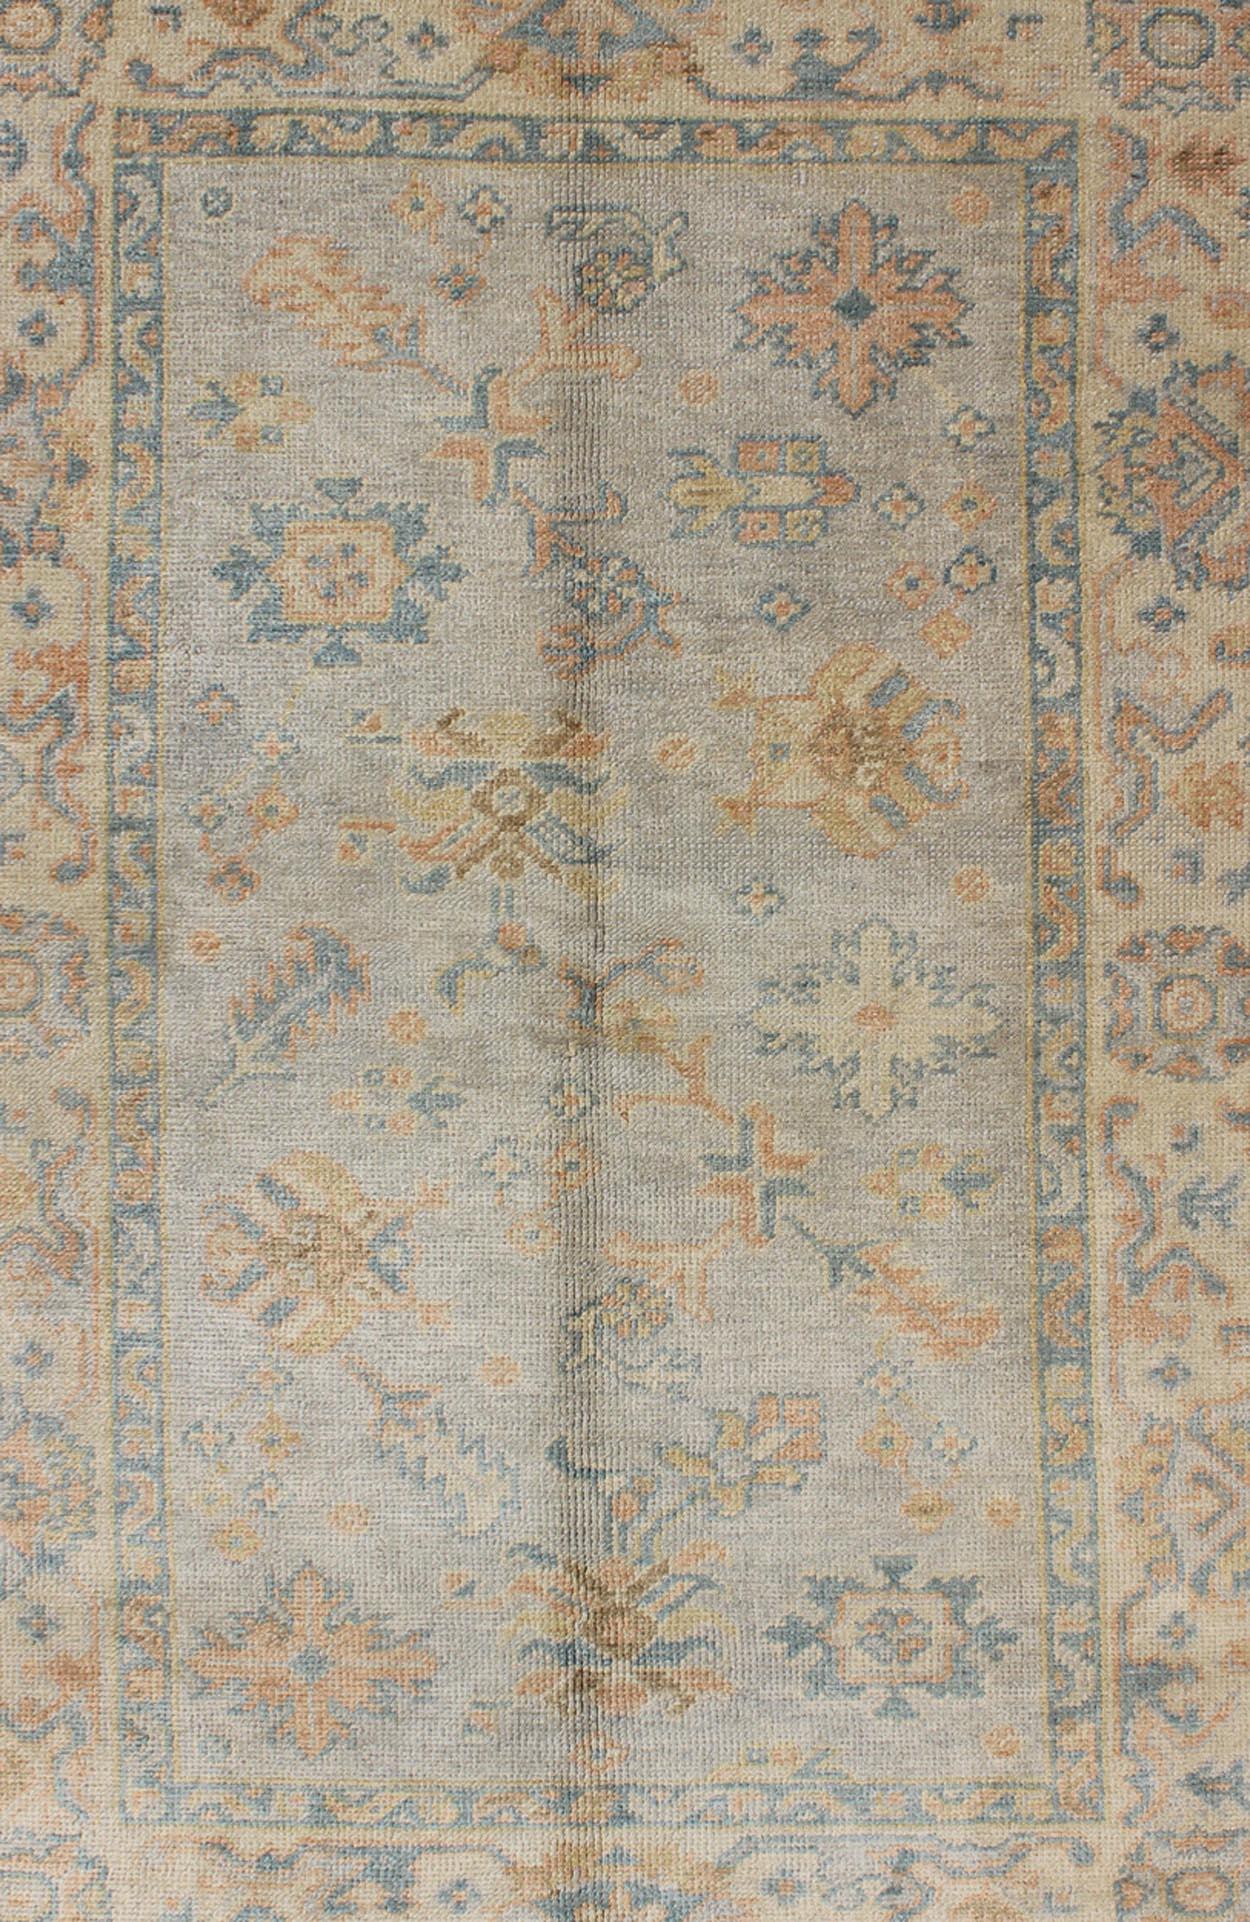 Hand-Knotted Turkish Oushak Rug with Neutral Color Palette and All-Over Flower Design